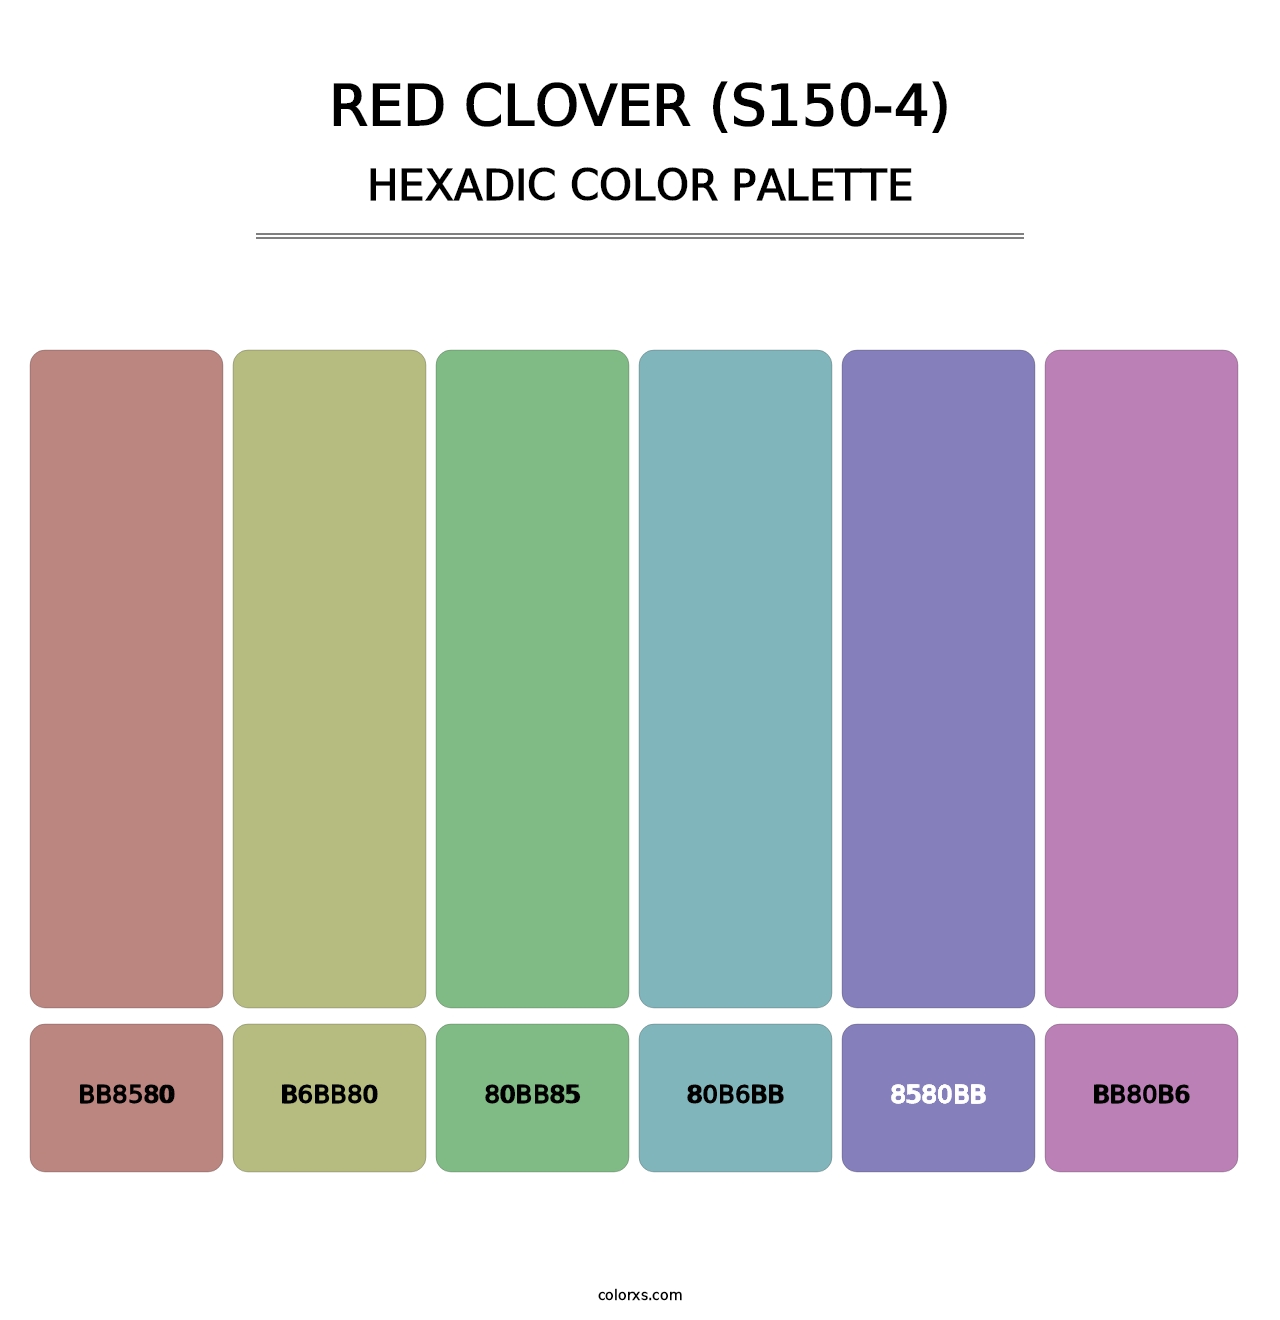 Red Clover (S150-4) - Hexadic Color Palette